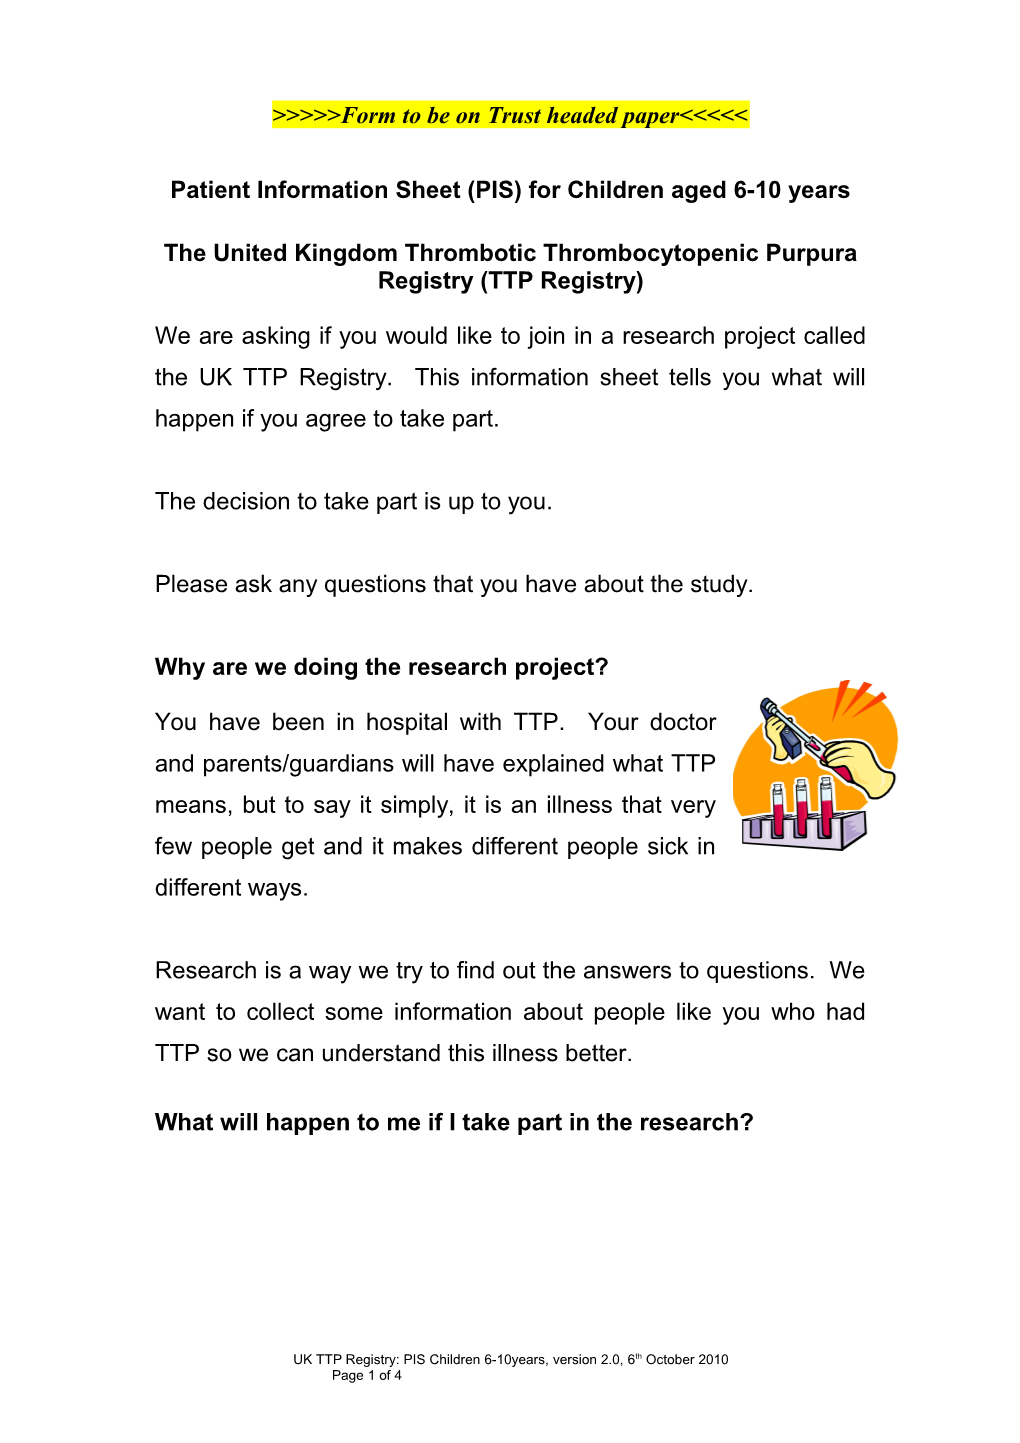 TTP Patient Information Sheet for Children Aged 6-10 Years